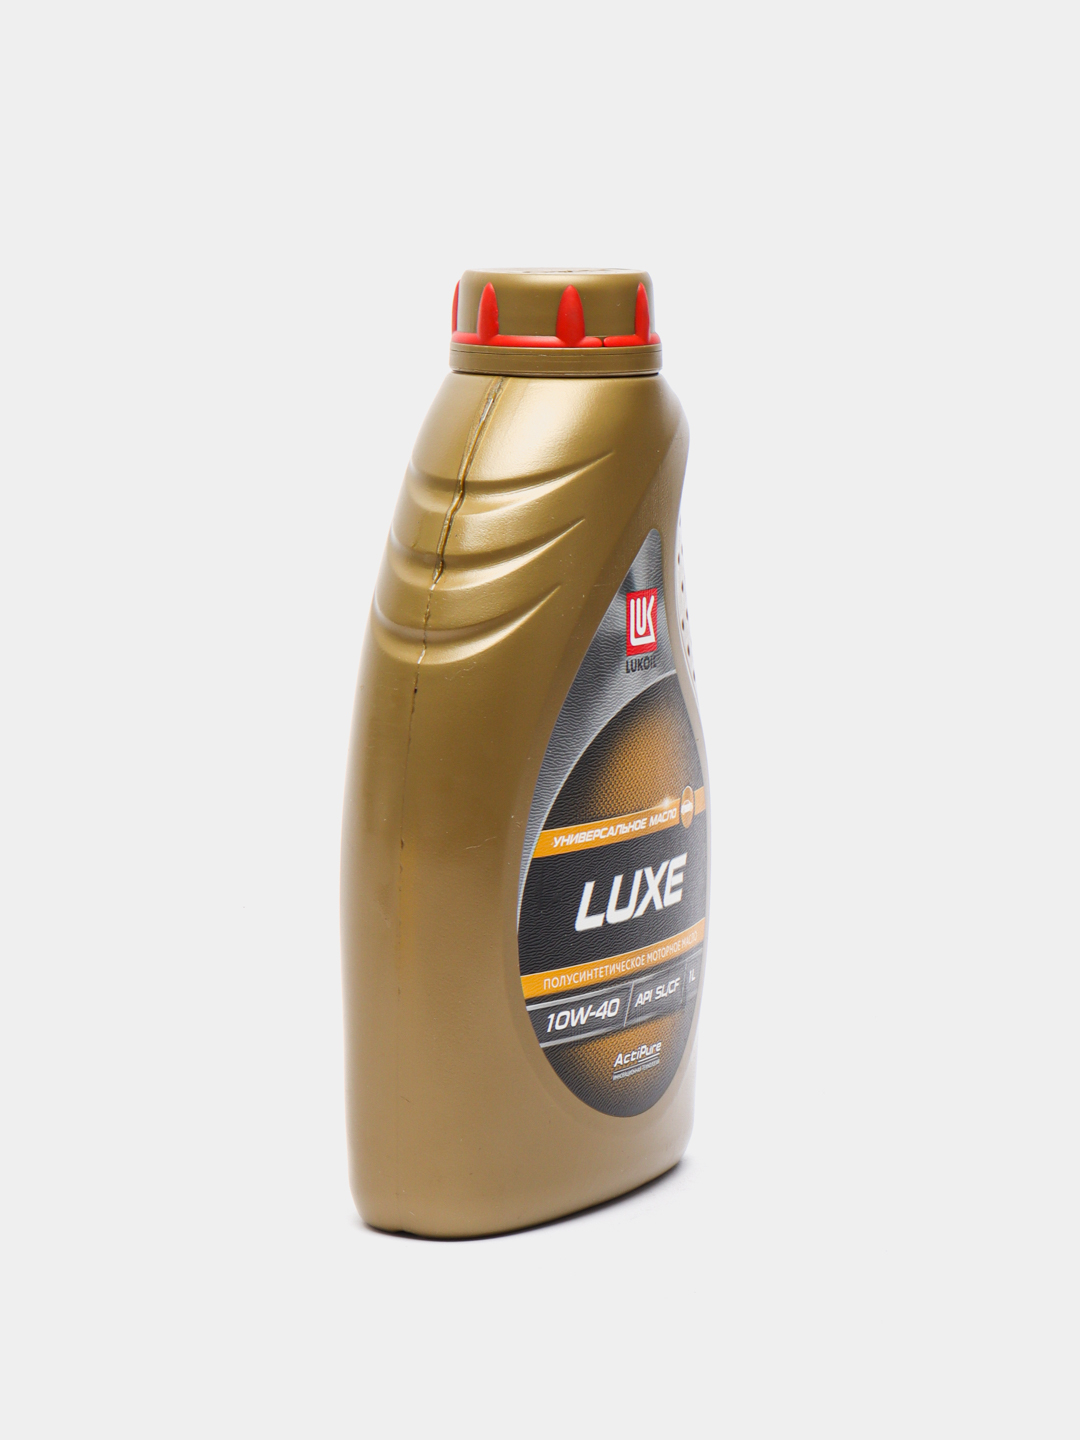 Масло лукойл люкс 5w 40. Lukoil Luxe 10w-40. Лукойл Люкс 5w40 полусинтетика. Масло моторное Лукойл Люкс 5w40 полусинтетика. Масло Luxe 5w40 полусинтетика.